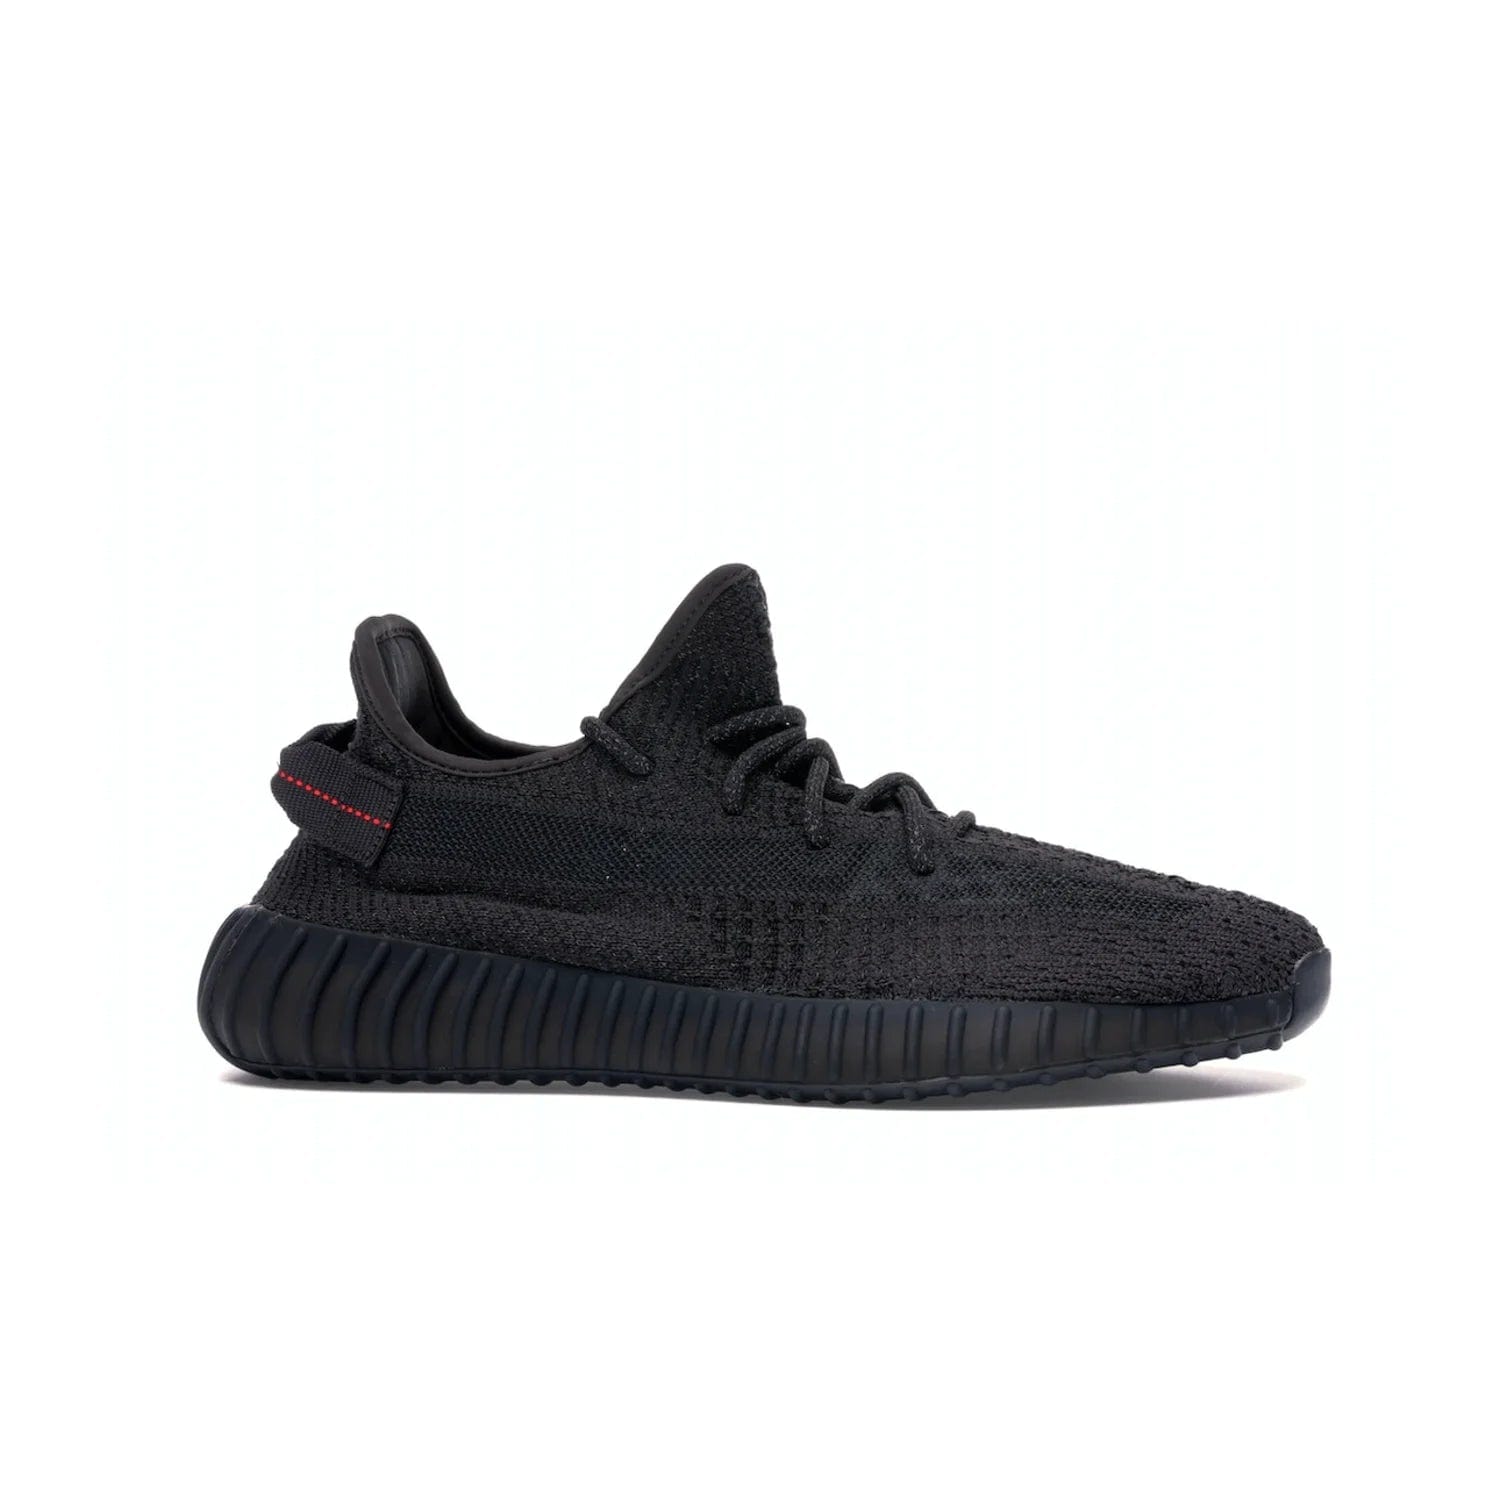 adidas Yeezy Boost 350 V2 Static Black (Reflective) - Image 2 - Only at www.BallersClubKickz.com - Make a statement with the adidas Yeezy Boost 350 V2 Static Black Reflective. All-black upper, reflective accents, midsole, and sole combine for a stylish look. High quality materials. June 2019 release. Add to your collection today.